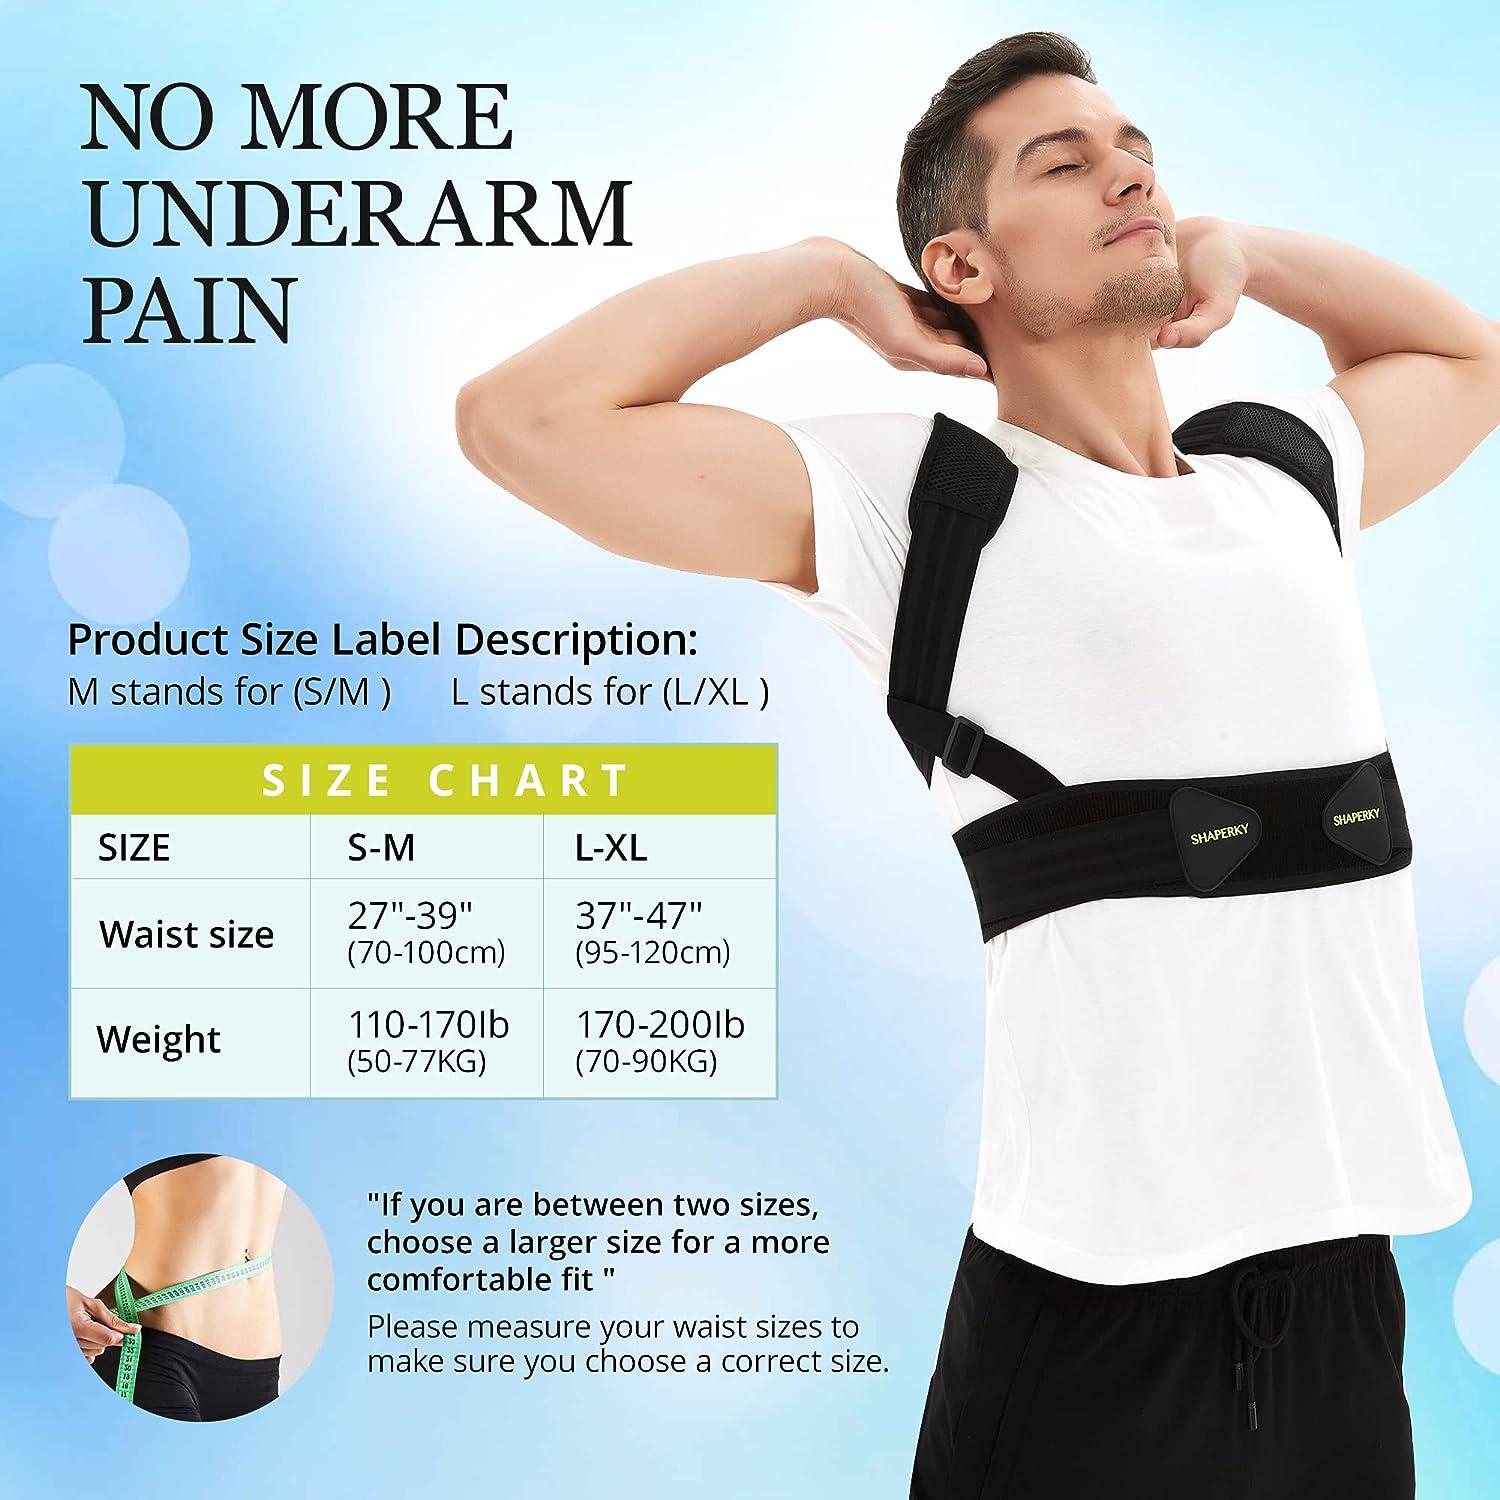 Lumbar Support Back Brace for Men and Women (Plus Size 50 - 70)